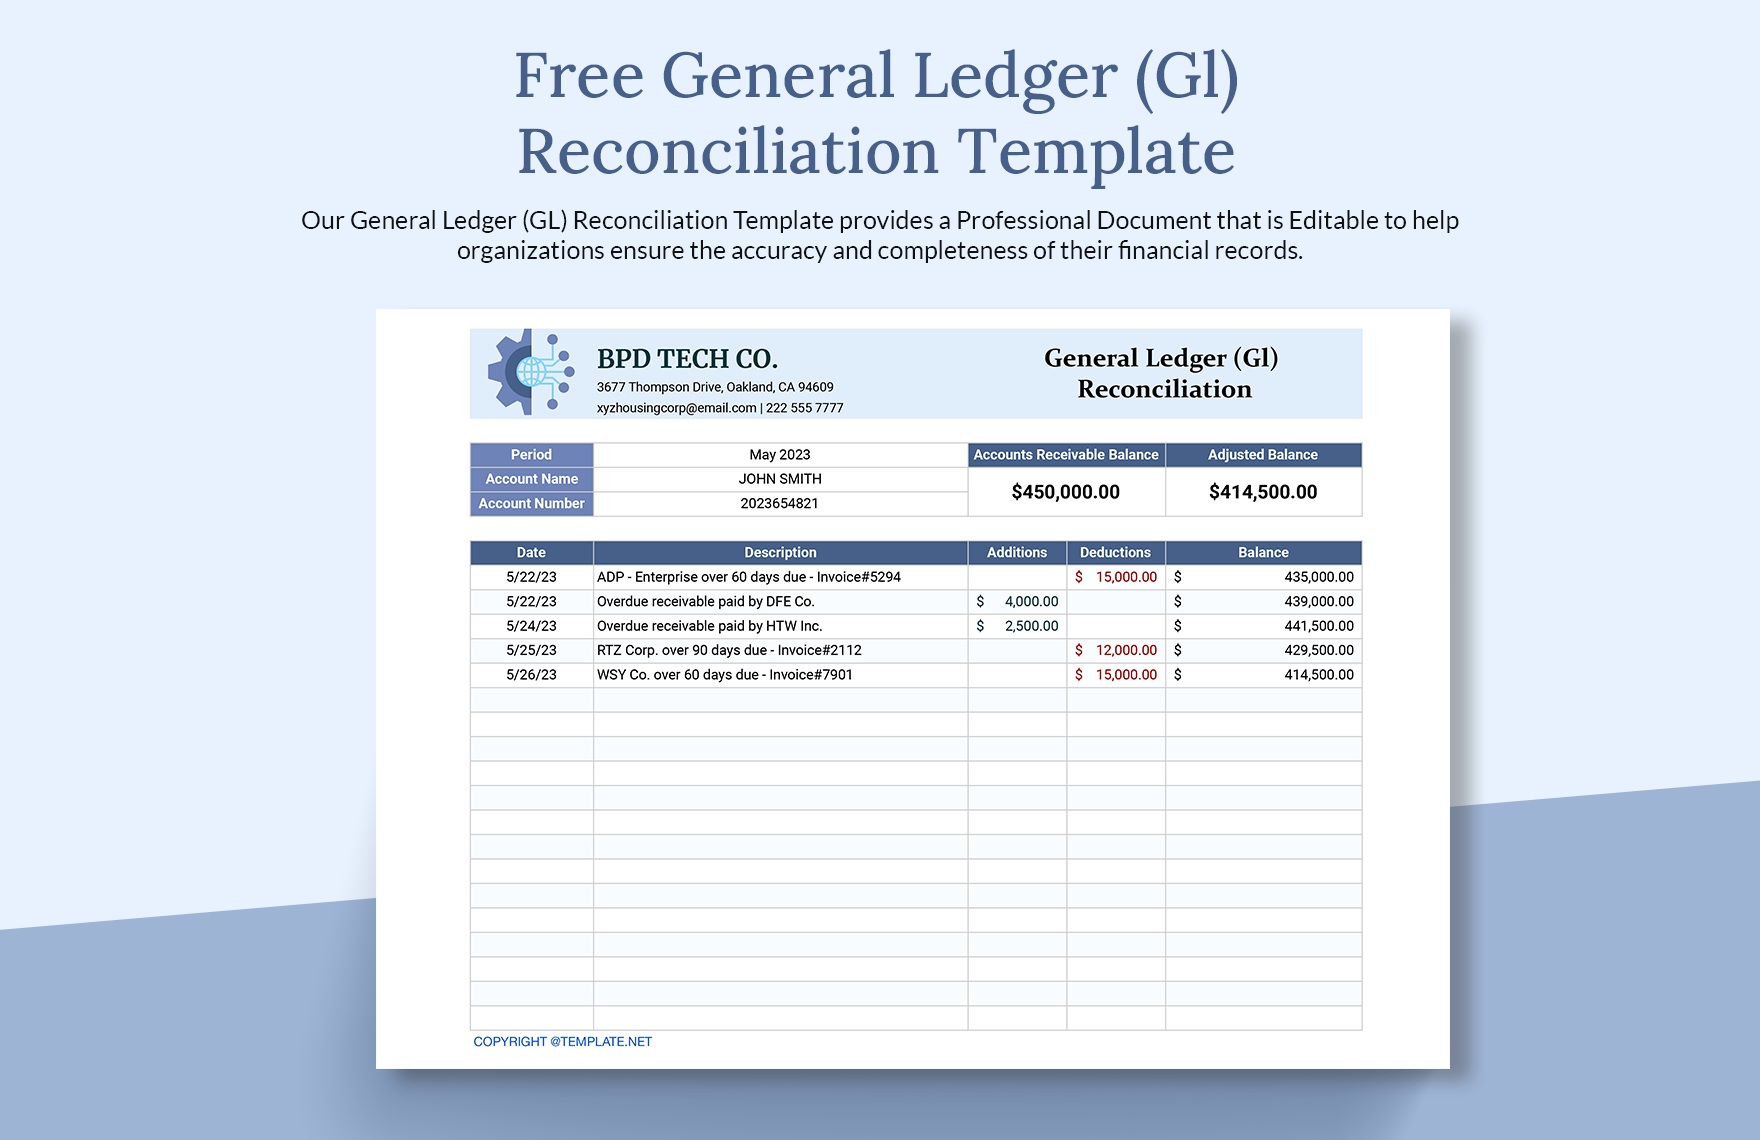 free-general-ledger-gl-reconciliation-template-download-in-excel